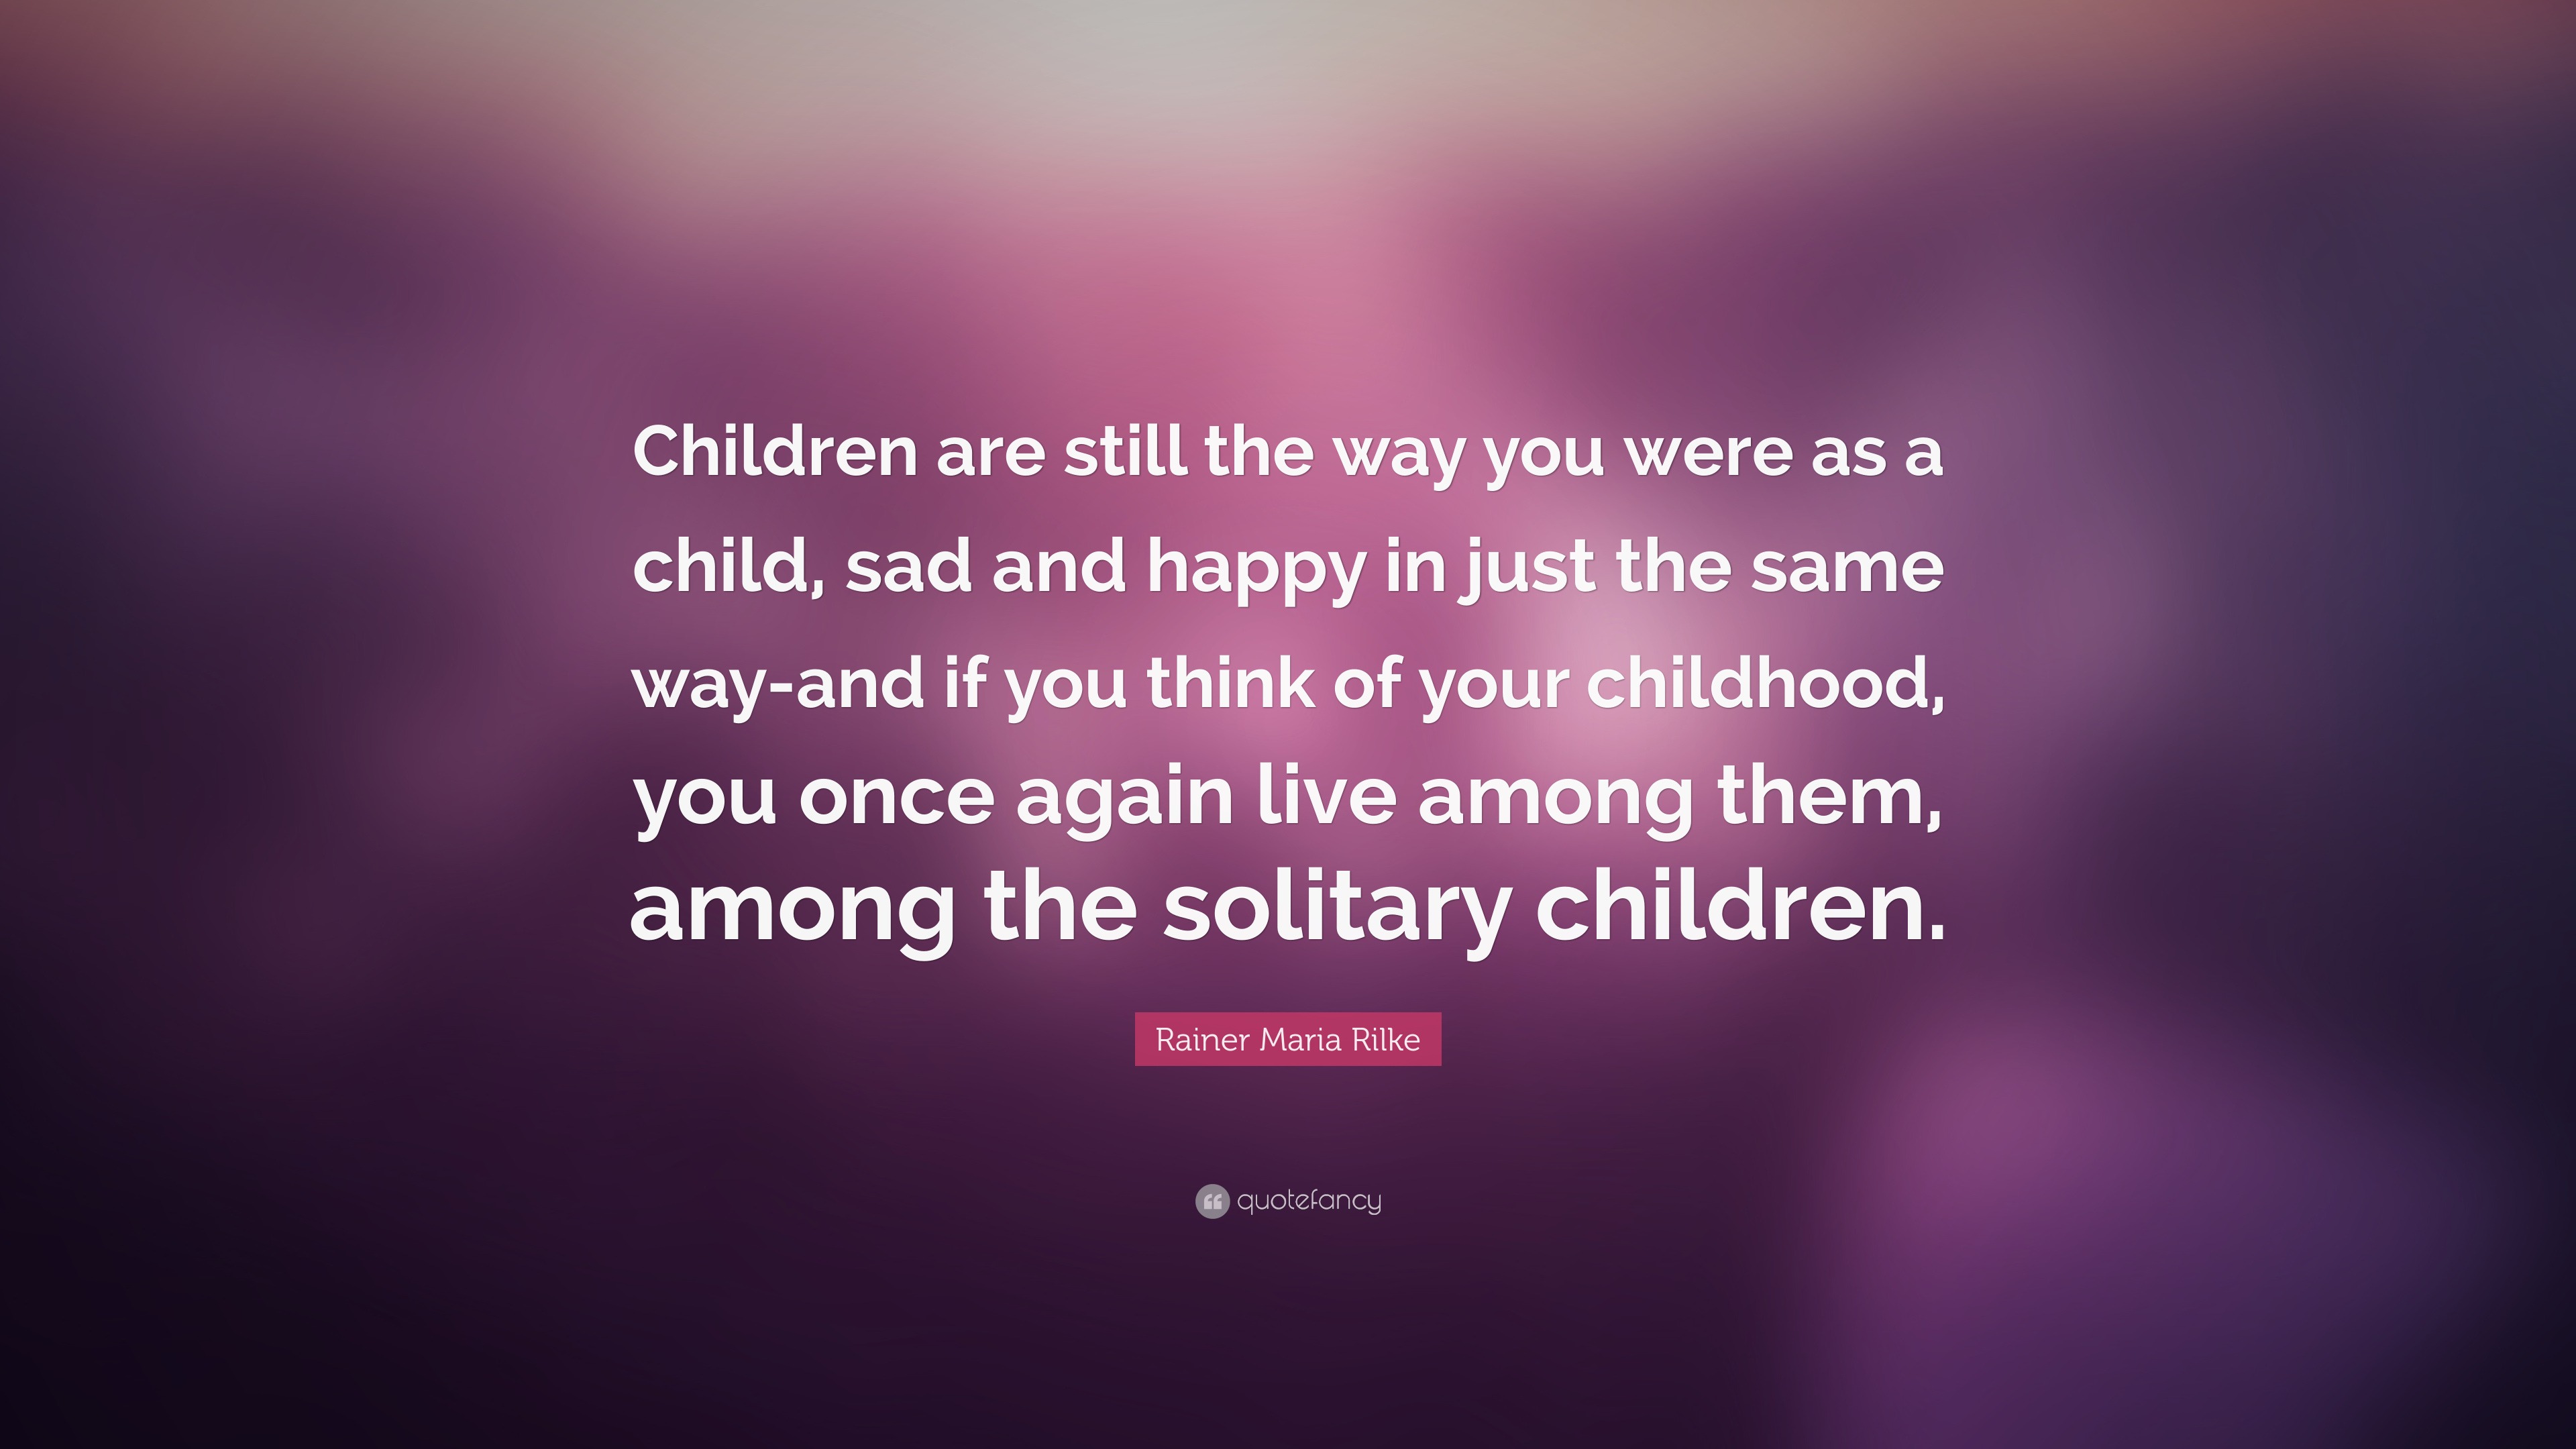 Rainer Maria Rilke Quote: “Children are still the way you were as a ...